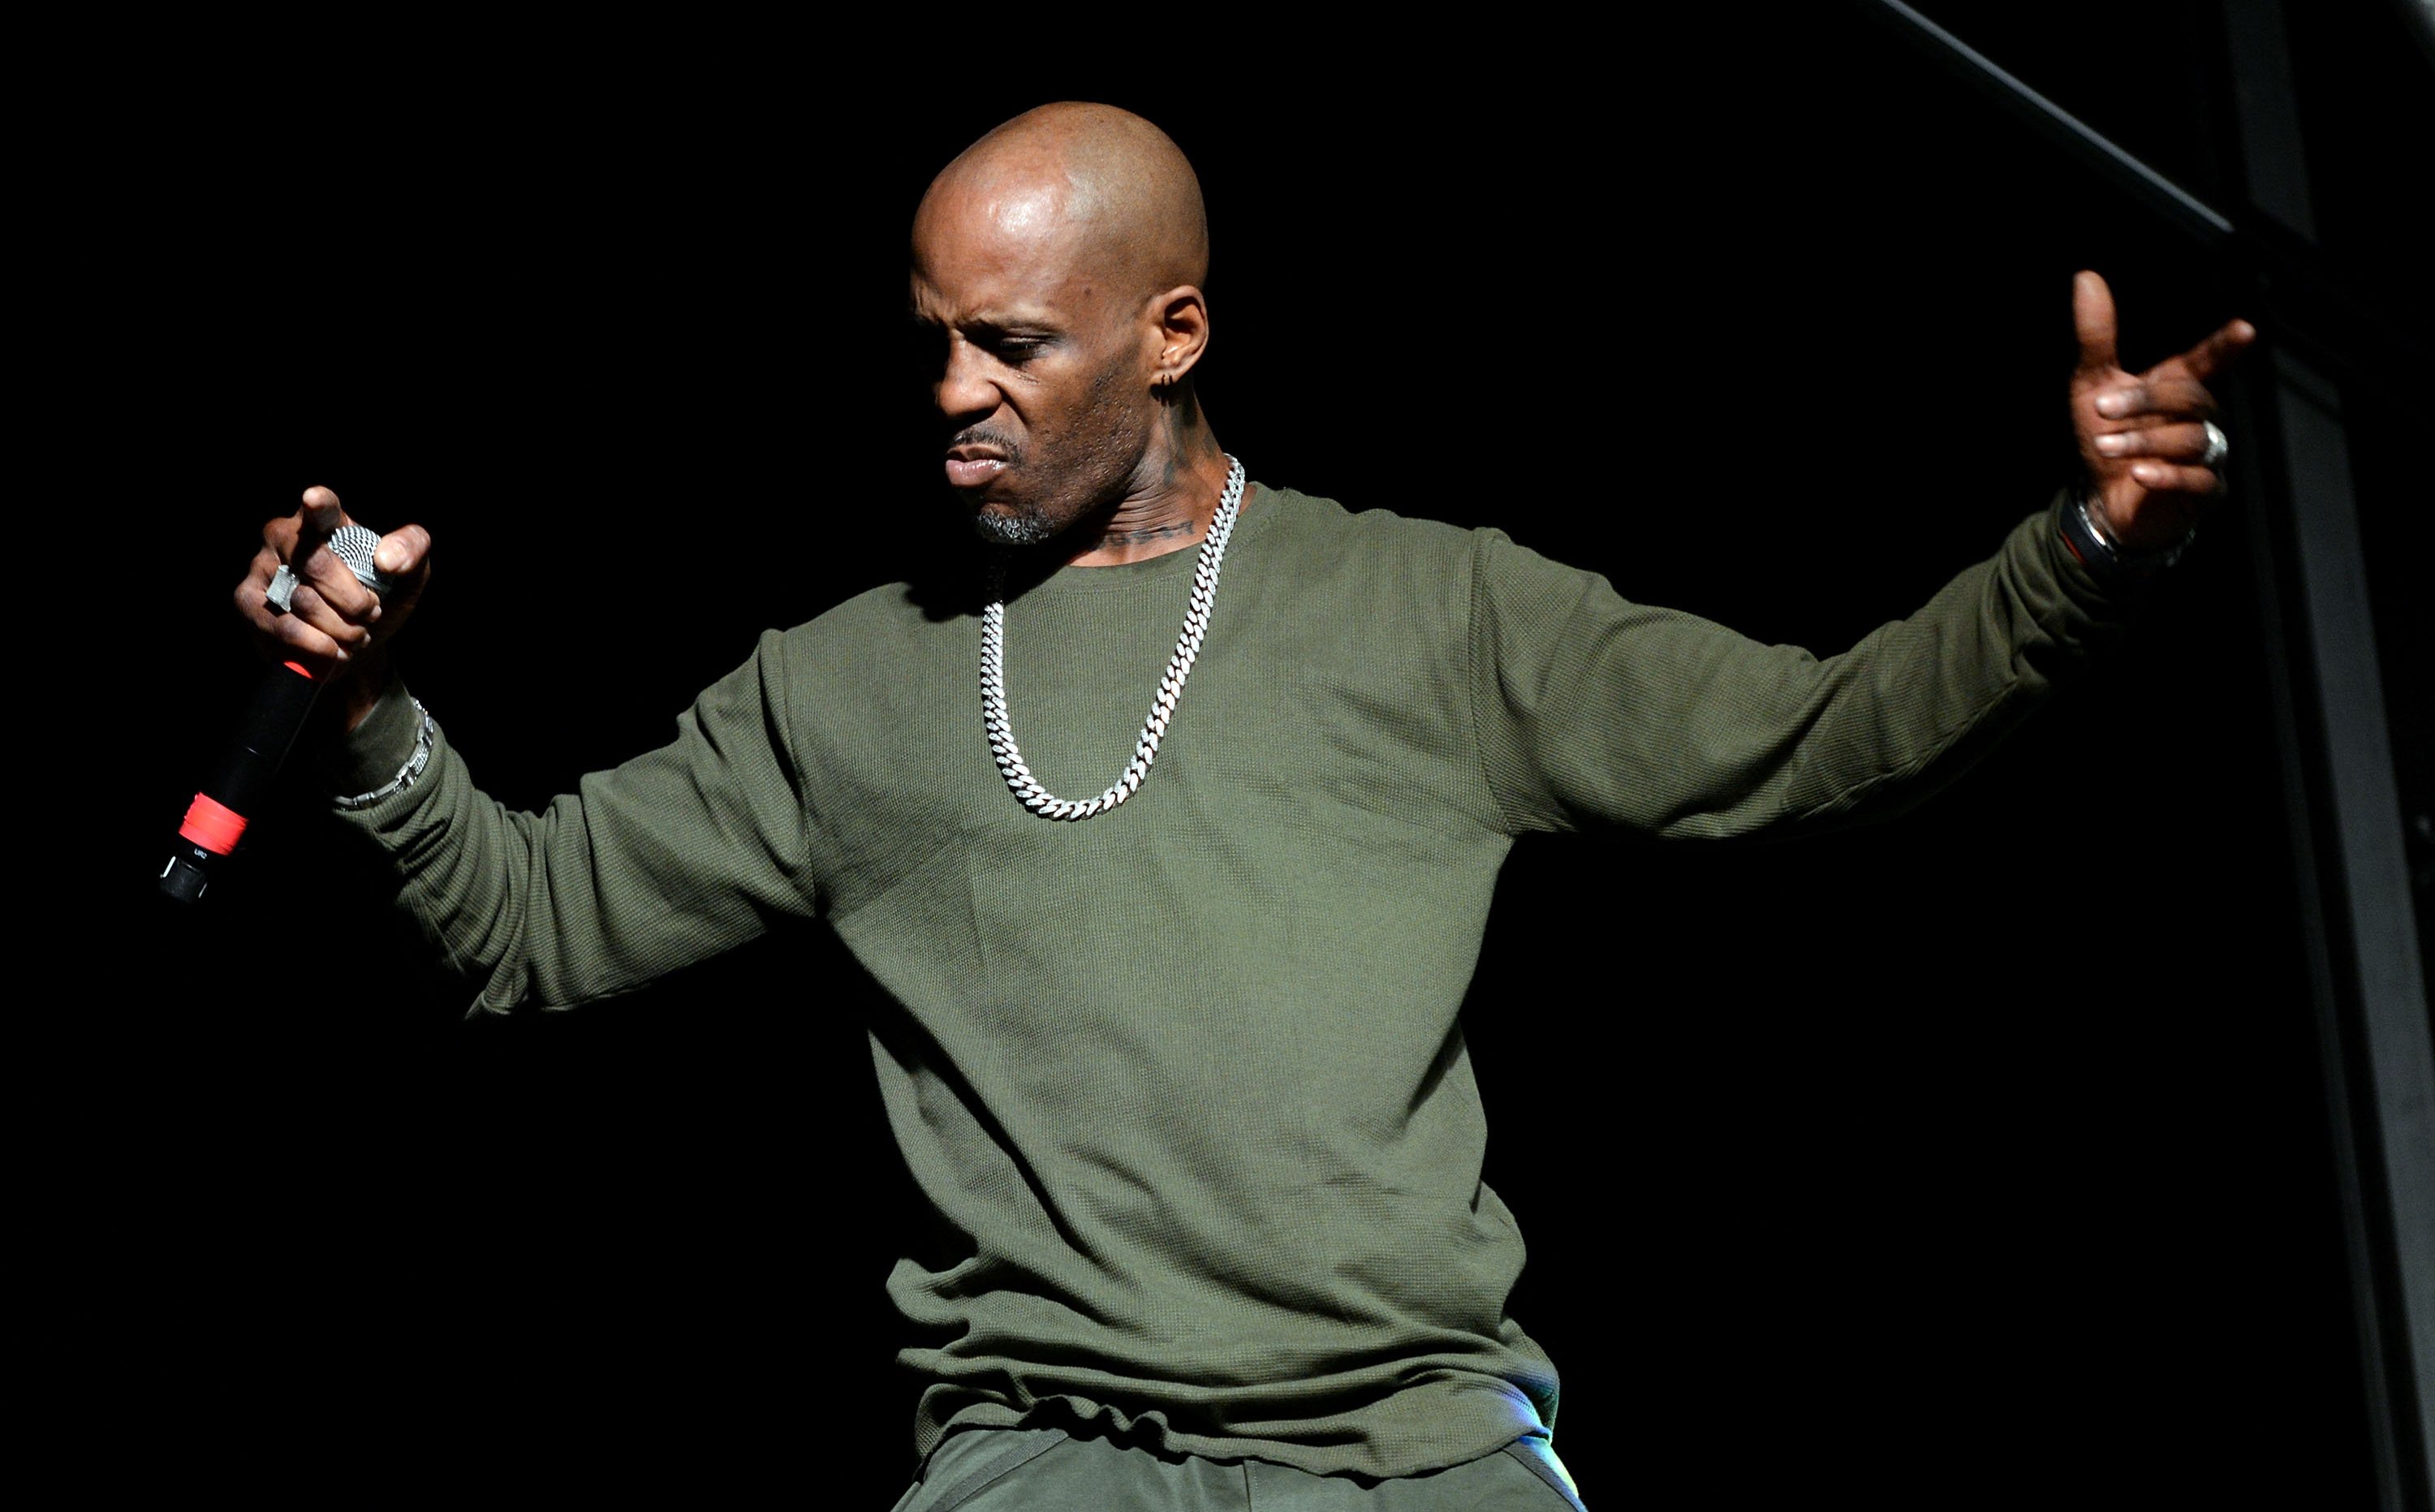 DMX with his arms wide open